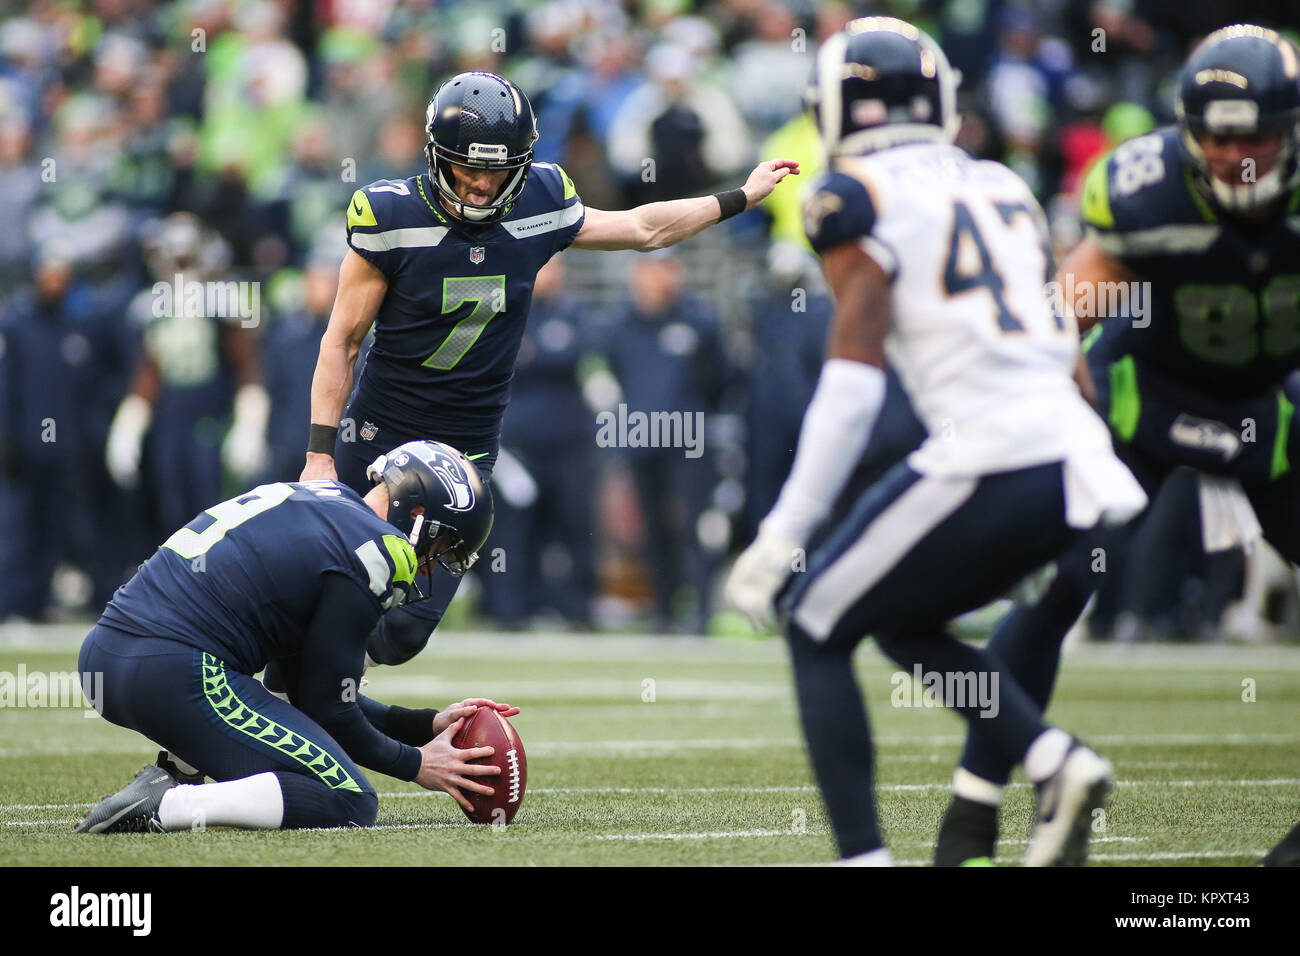 Seattle, WA, USA. 17th Dec, 2017. Seattle Seahawks kicker Blair Walsh (7) kicks an extra point during a game between the Los Angeles Rams and Seattle Seahawks at CenturyLink Field in Seattle, WA. The Rams won 42-7. Sean Brown/CSM/Alamy Live News Stock Photo